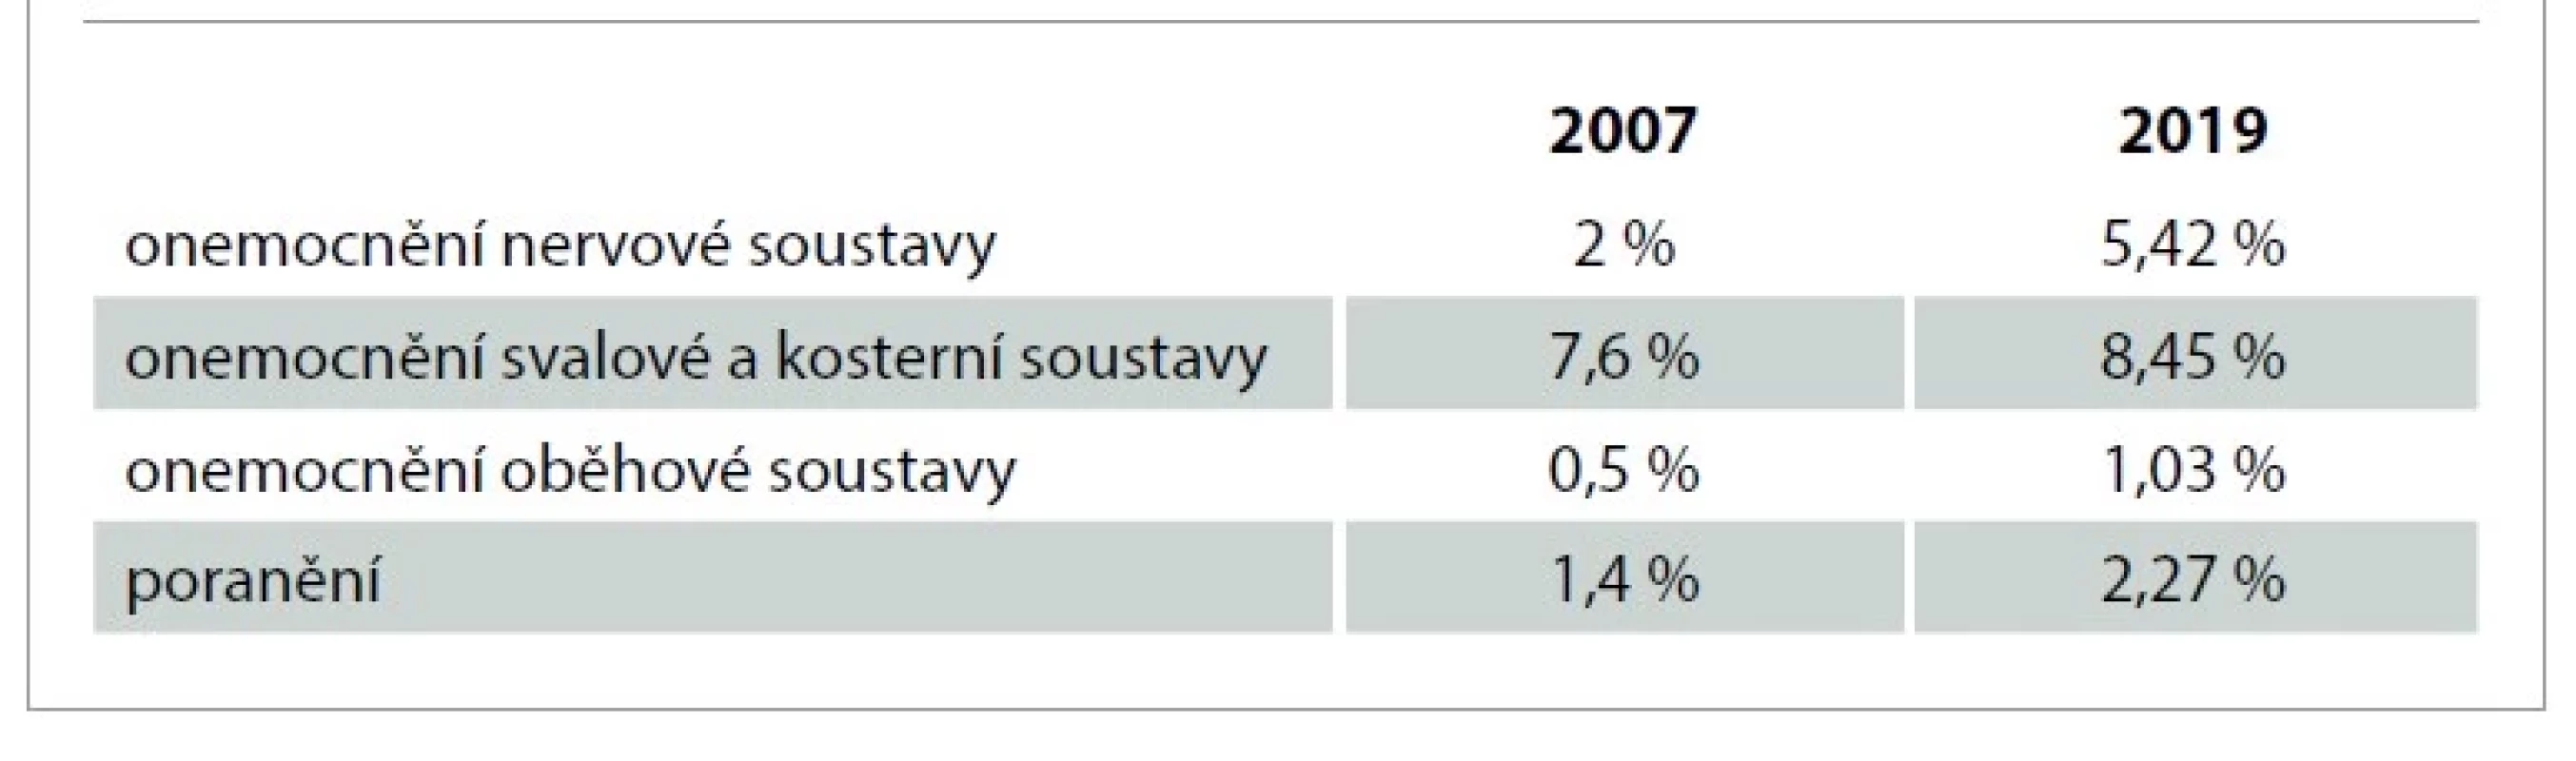 Onemocnění v letech 2007 a 2019 [1,5].<br>
Tab. 3. Diseases in 2007 and 2019 [1,5].